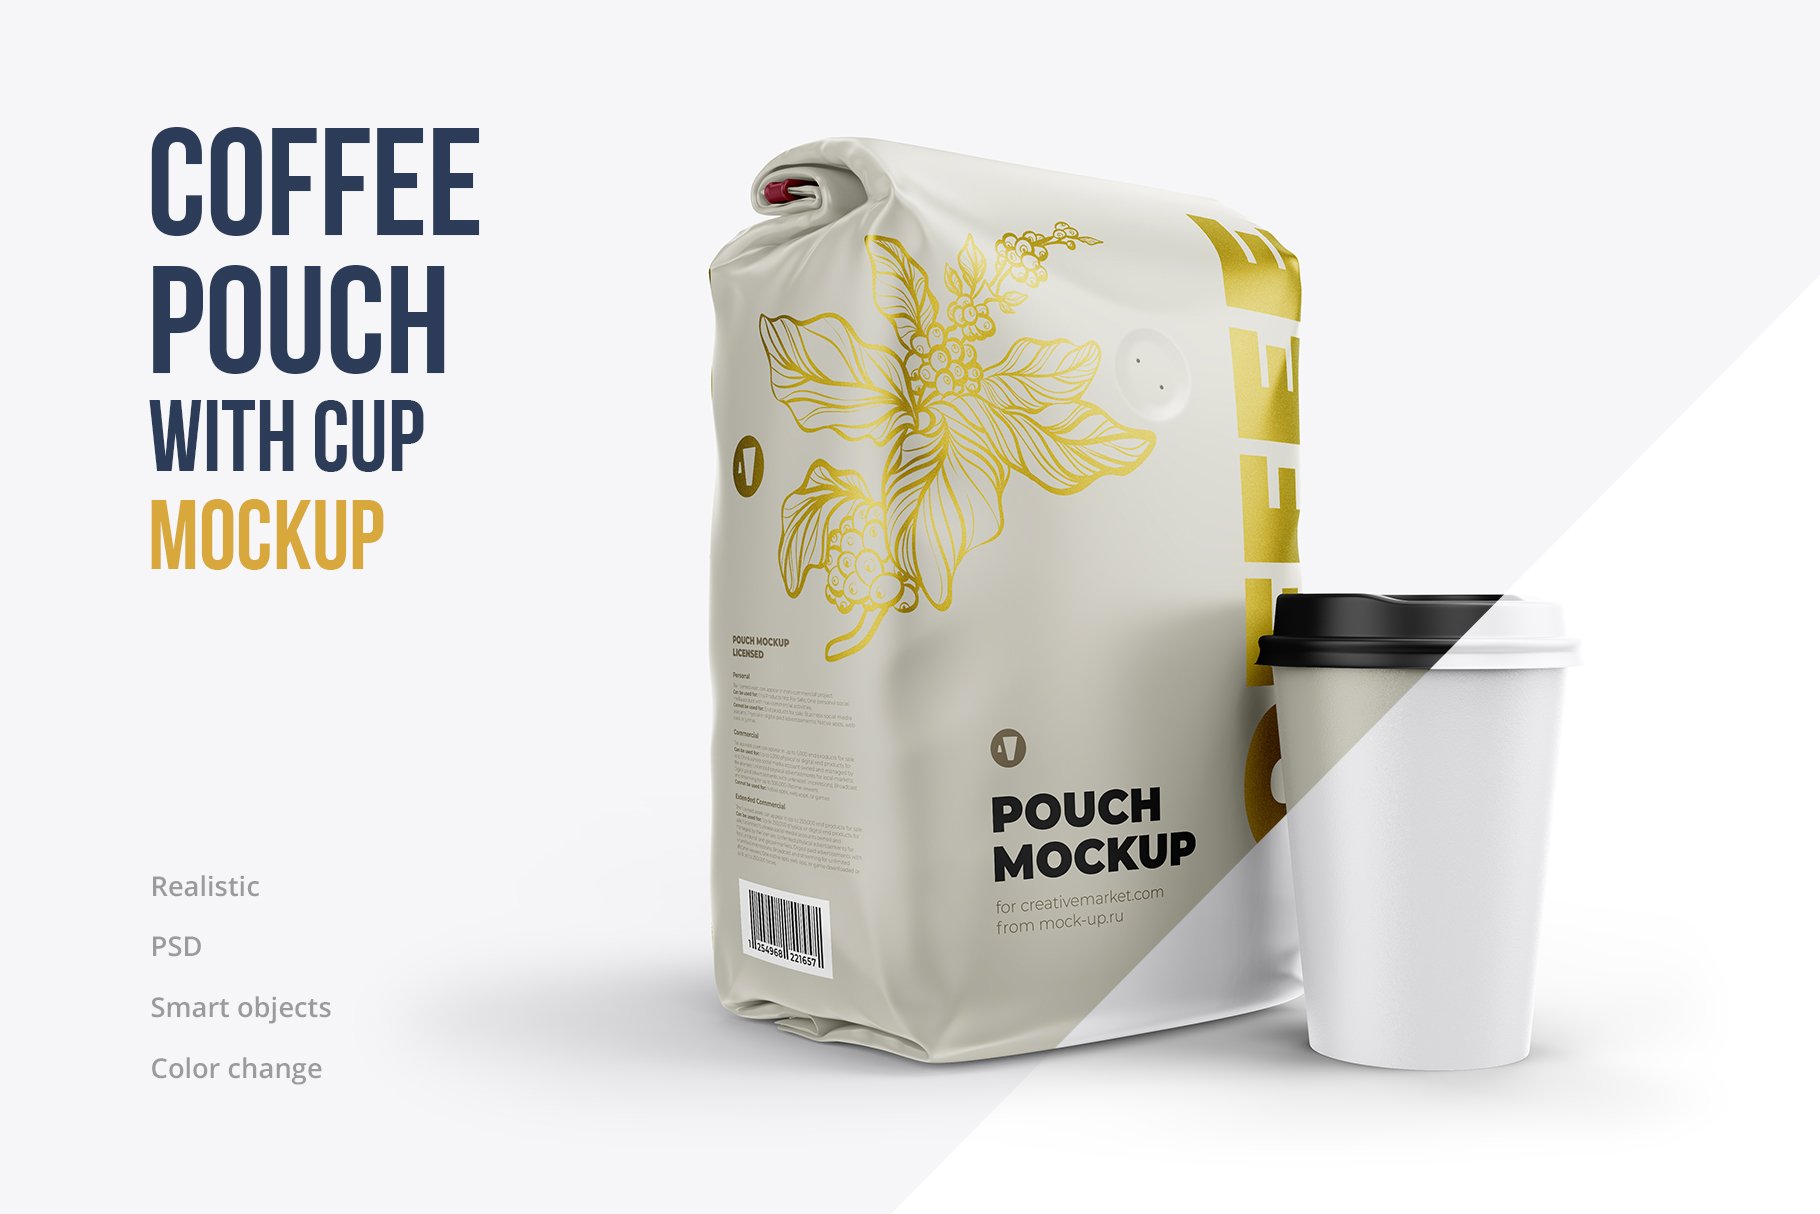 Coffee pouch with Cup. Half Side cover image.